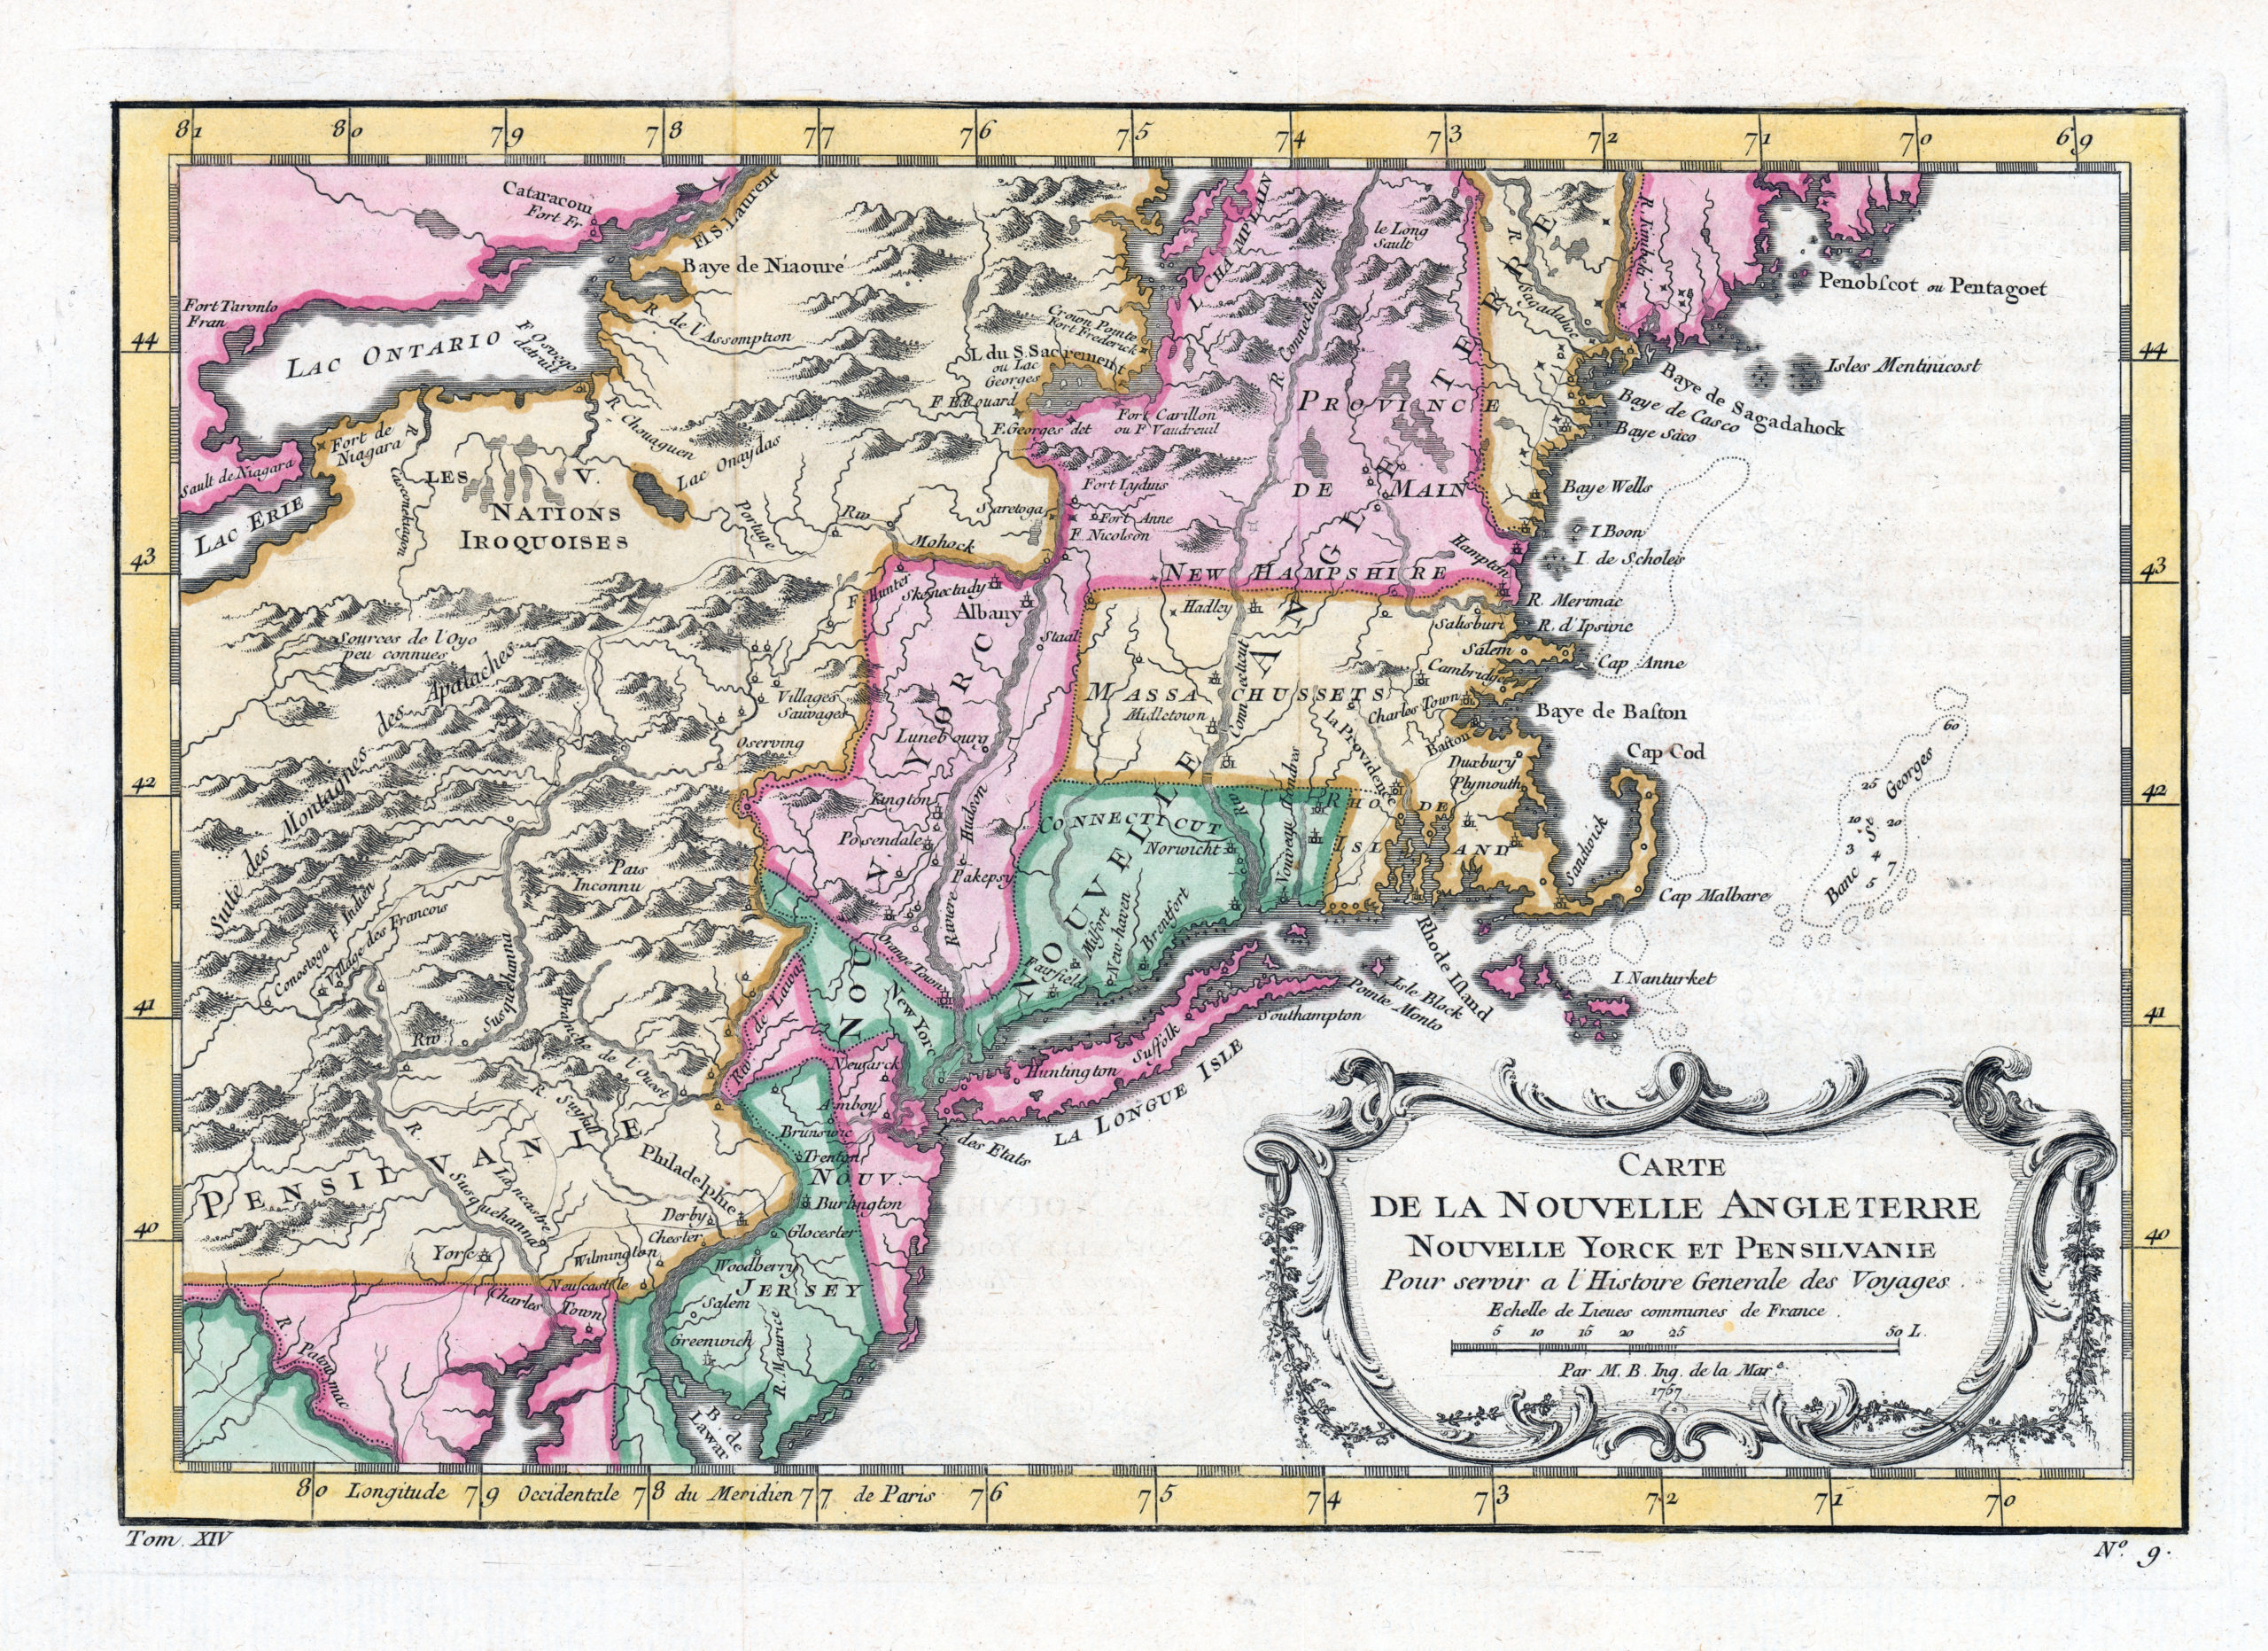 A French map of New England, 1757.